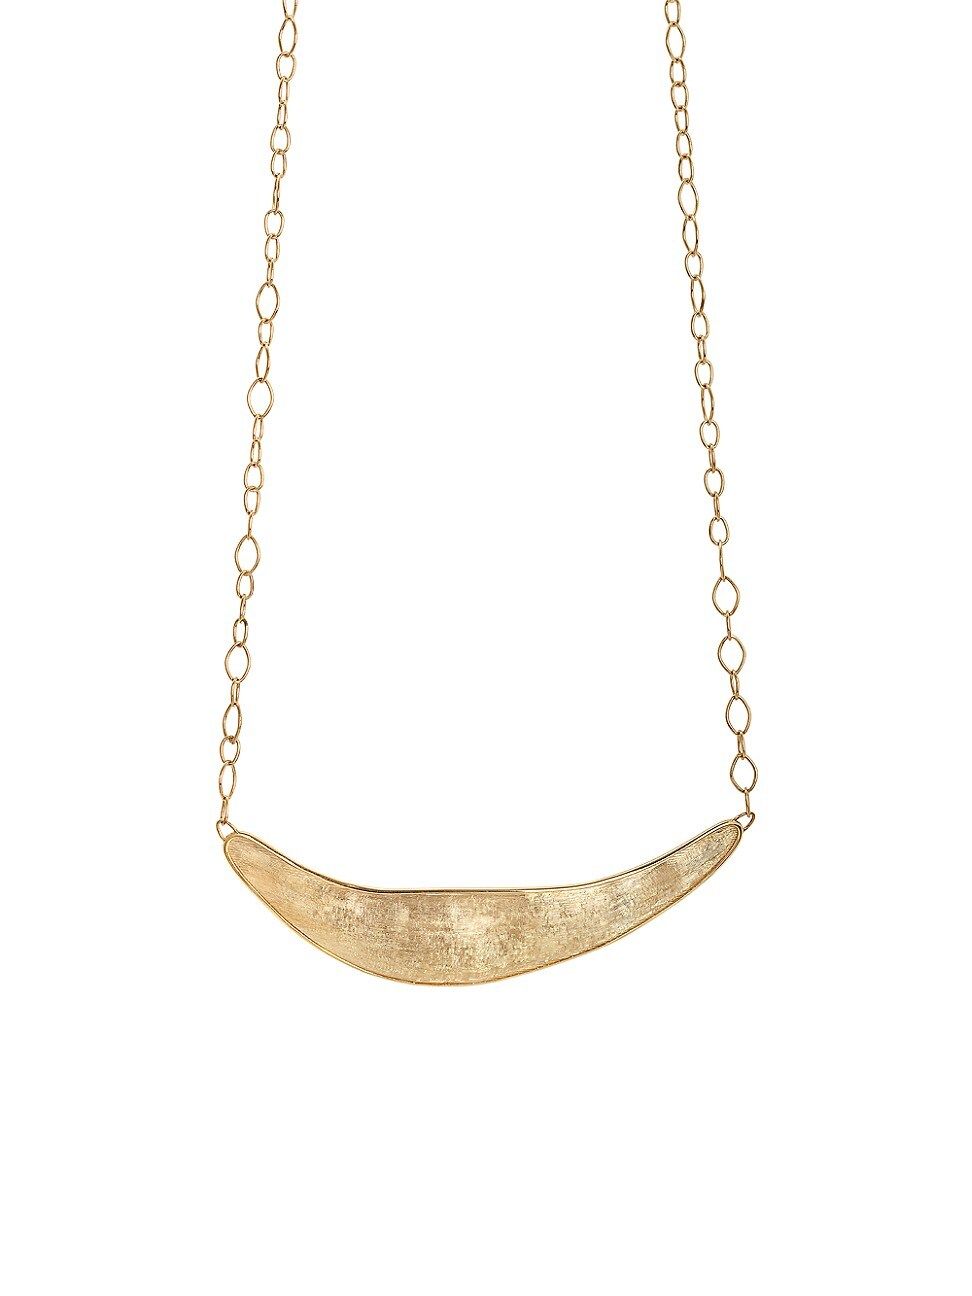 Lunaria 18K Yellow Gold Curved Bar Pendant Necklace | Saks Fifth Avenue